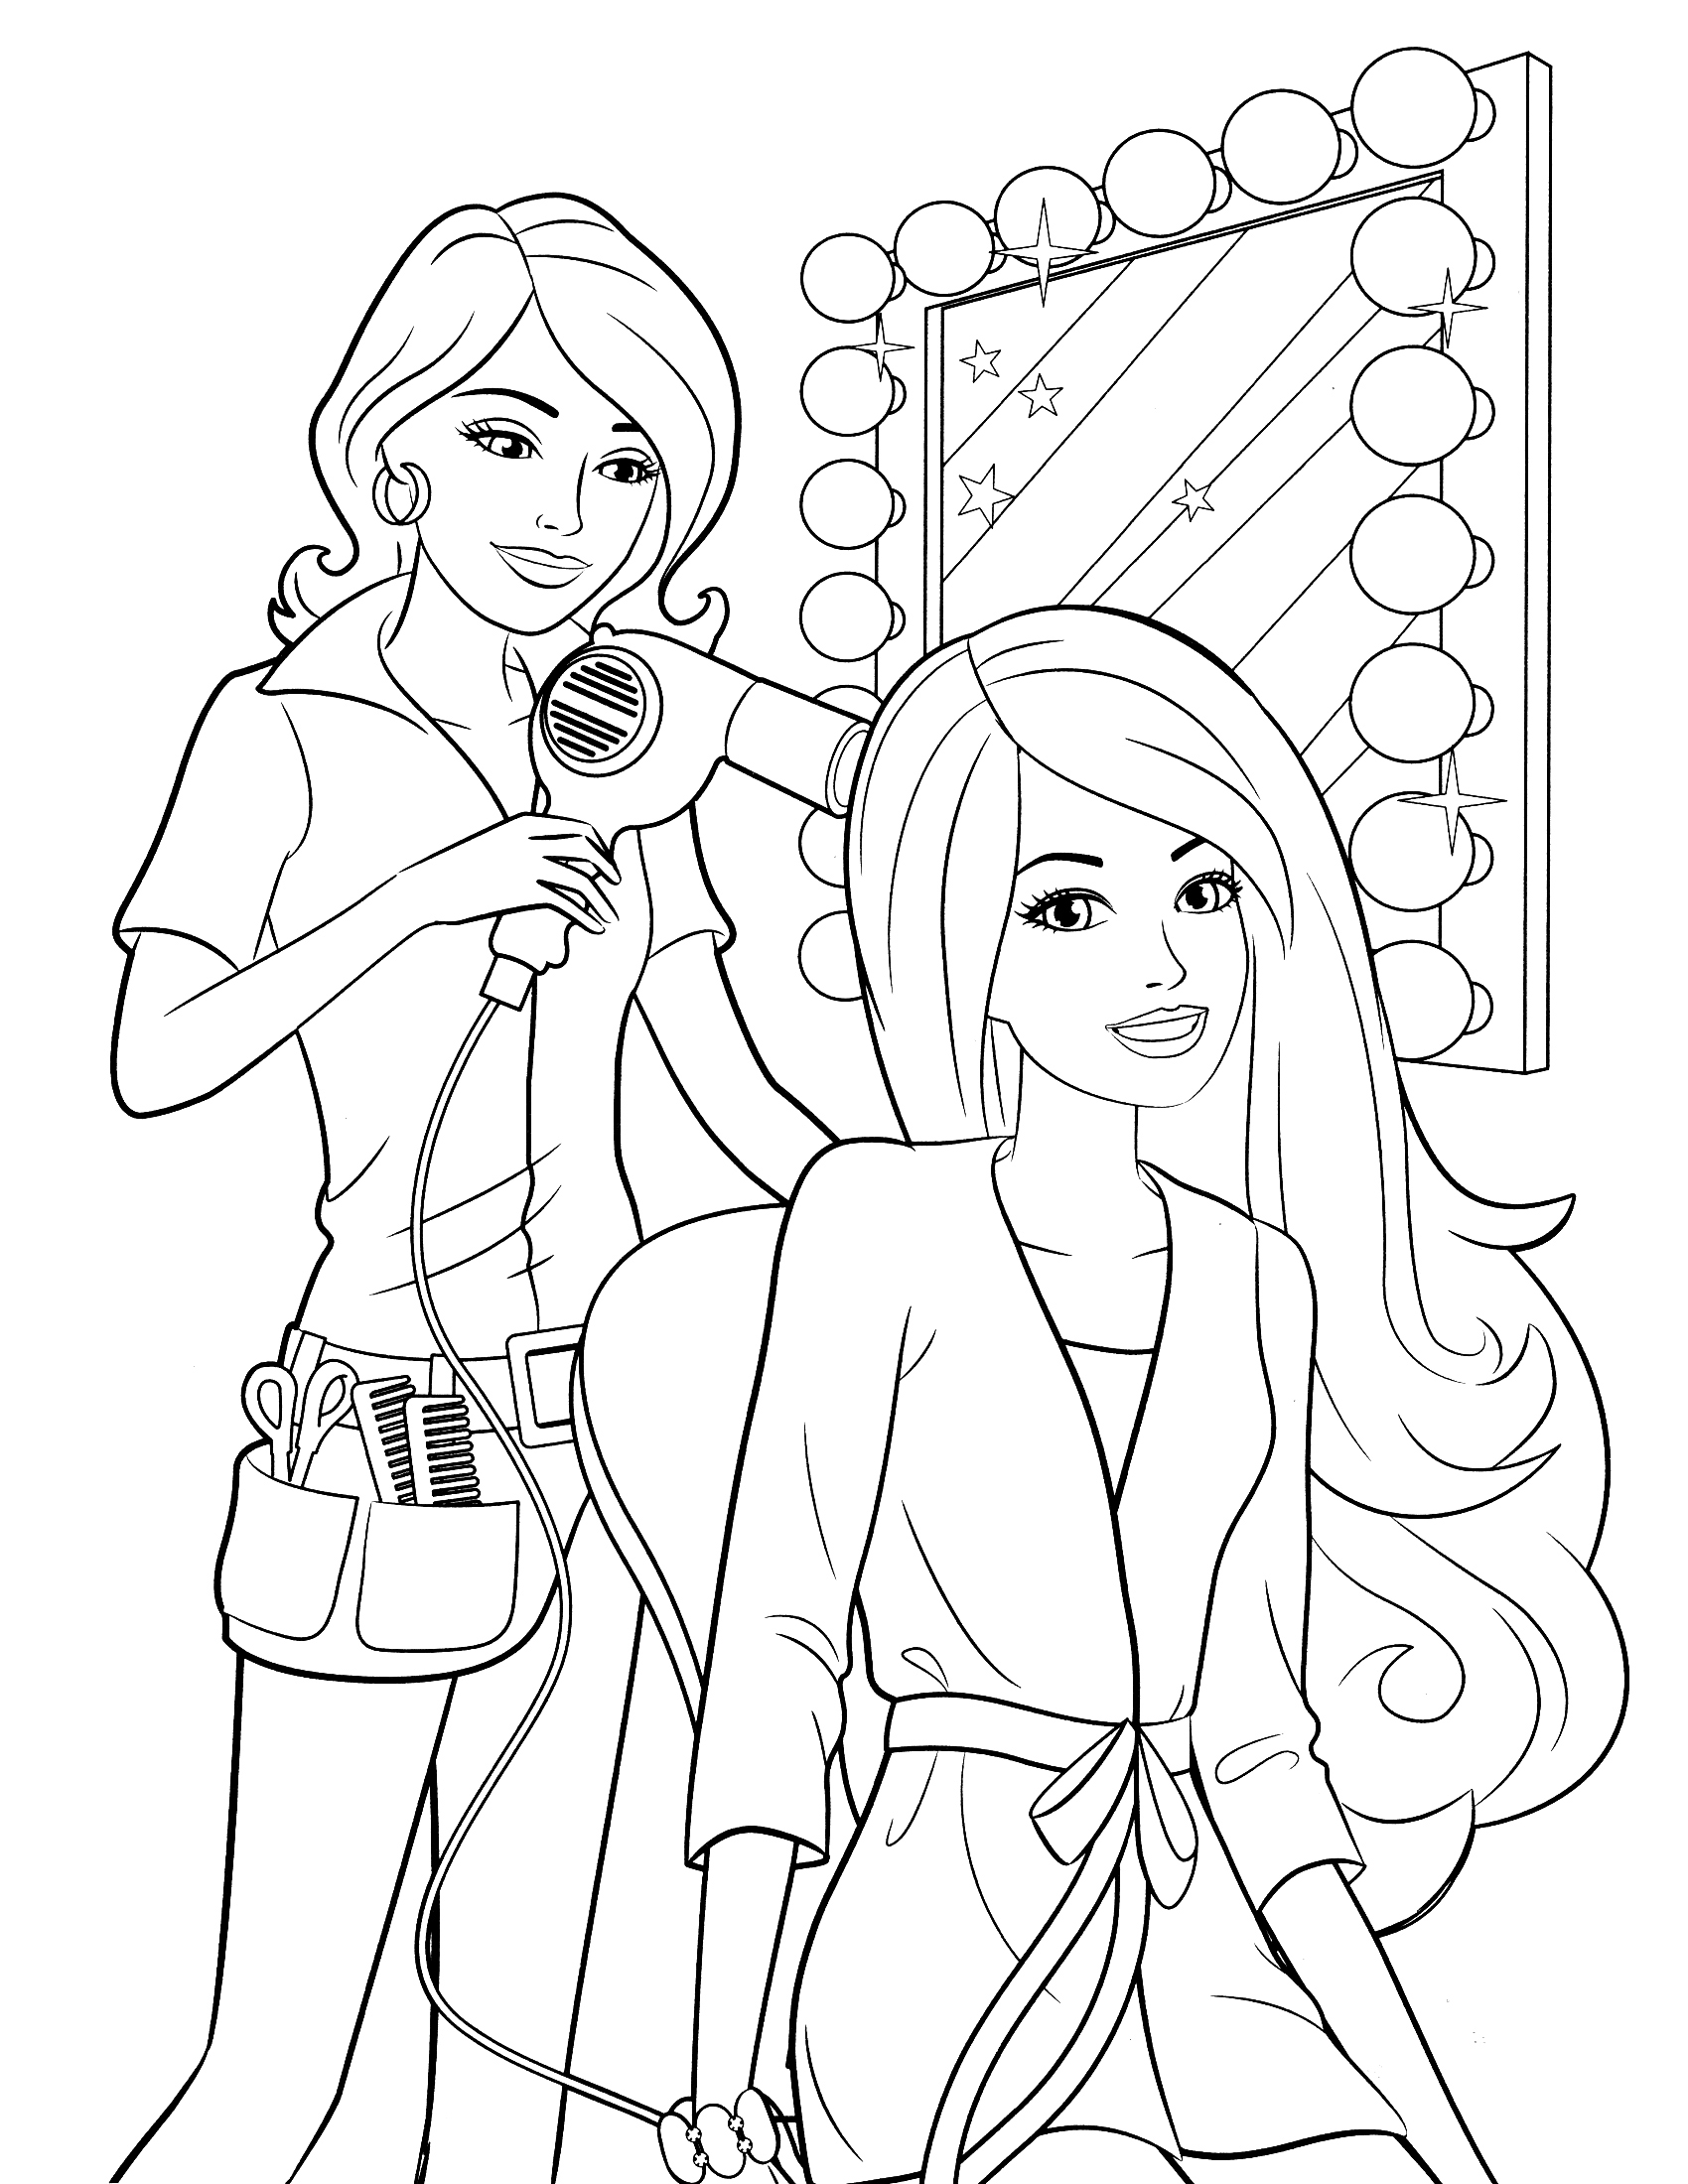 girl colouring pictures coloring pages for girls best coloring pages for kids colouring pictures girl 